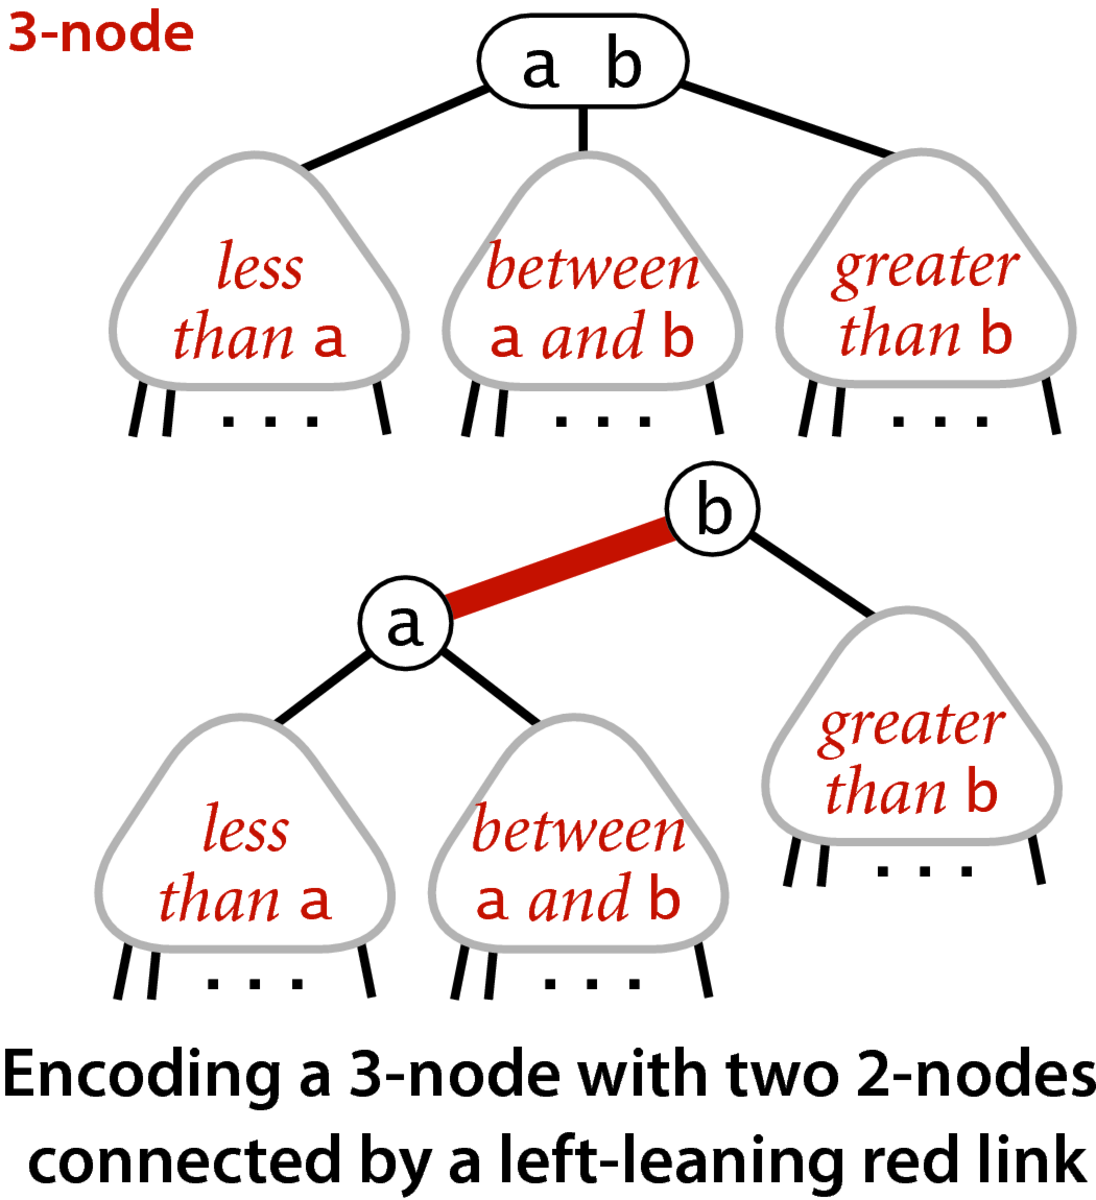 [Encoding a 3-node with two 2-nodes connected by a left-leaning red link]